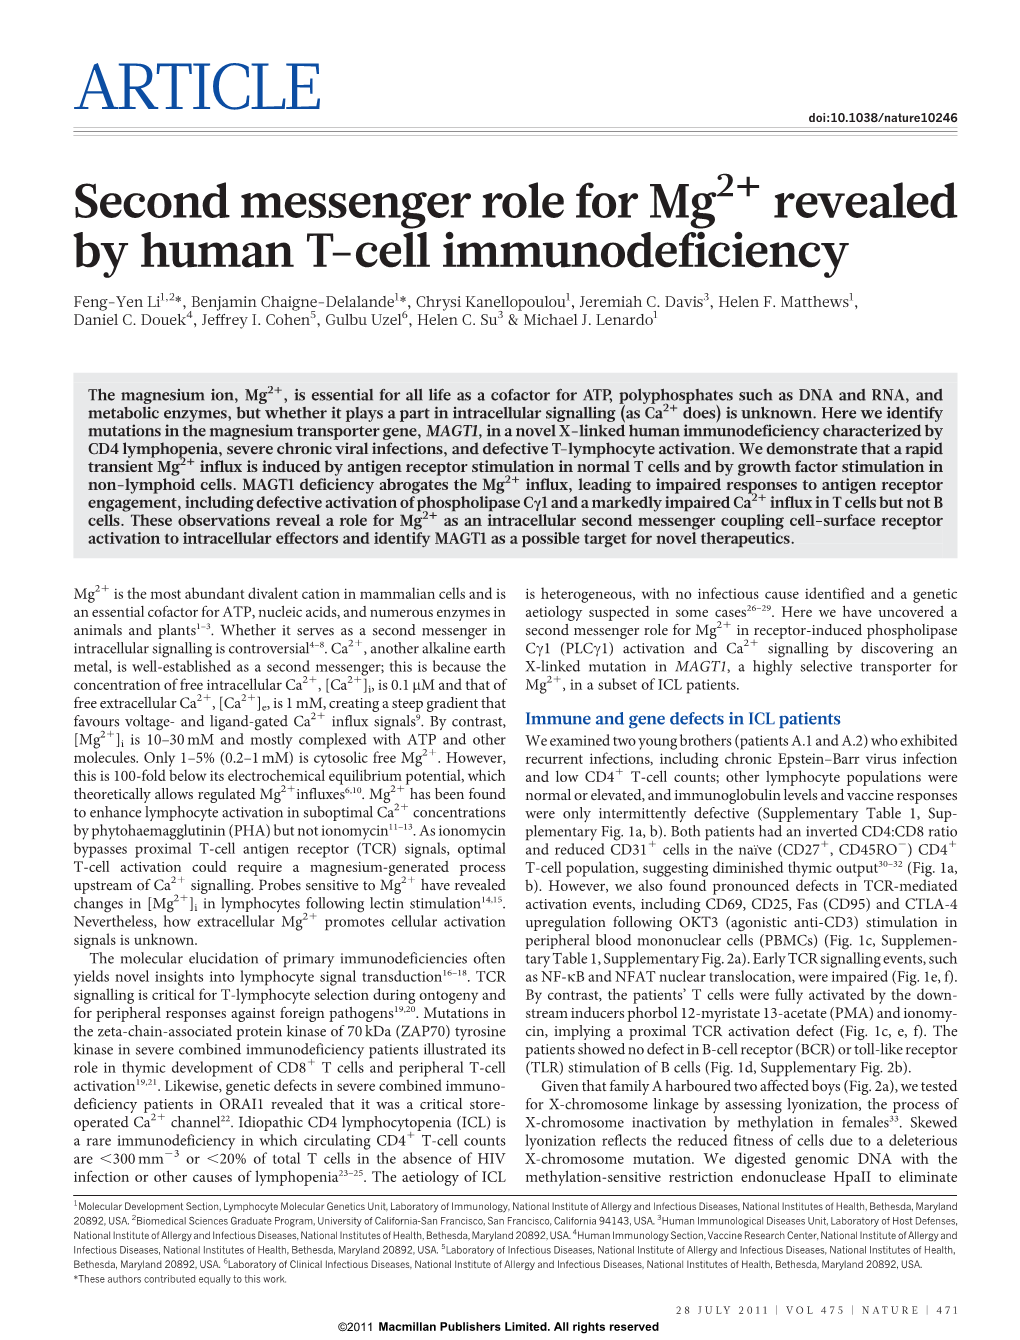 Second Messenger Role for Mg2+ Revealed by Human T-Cell